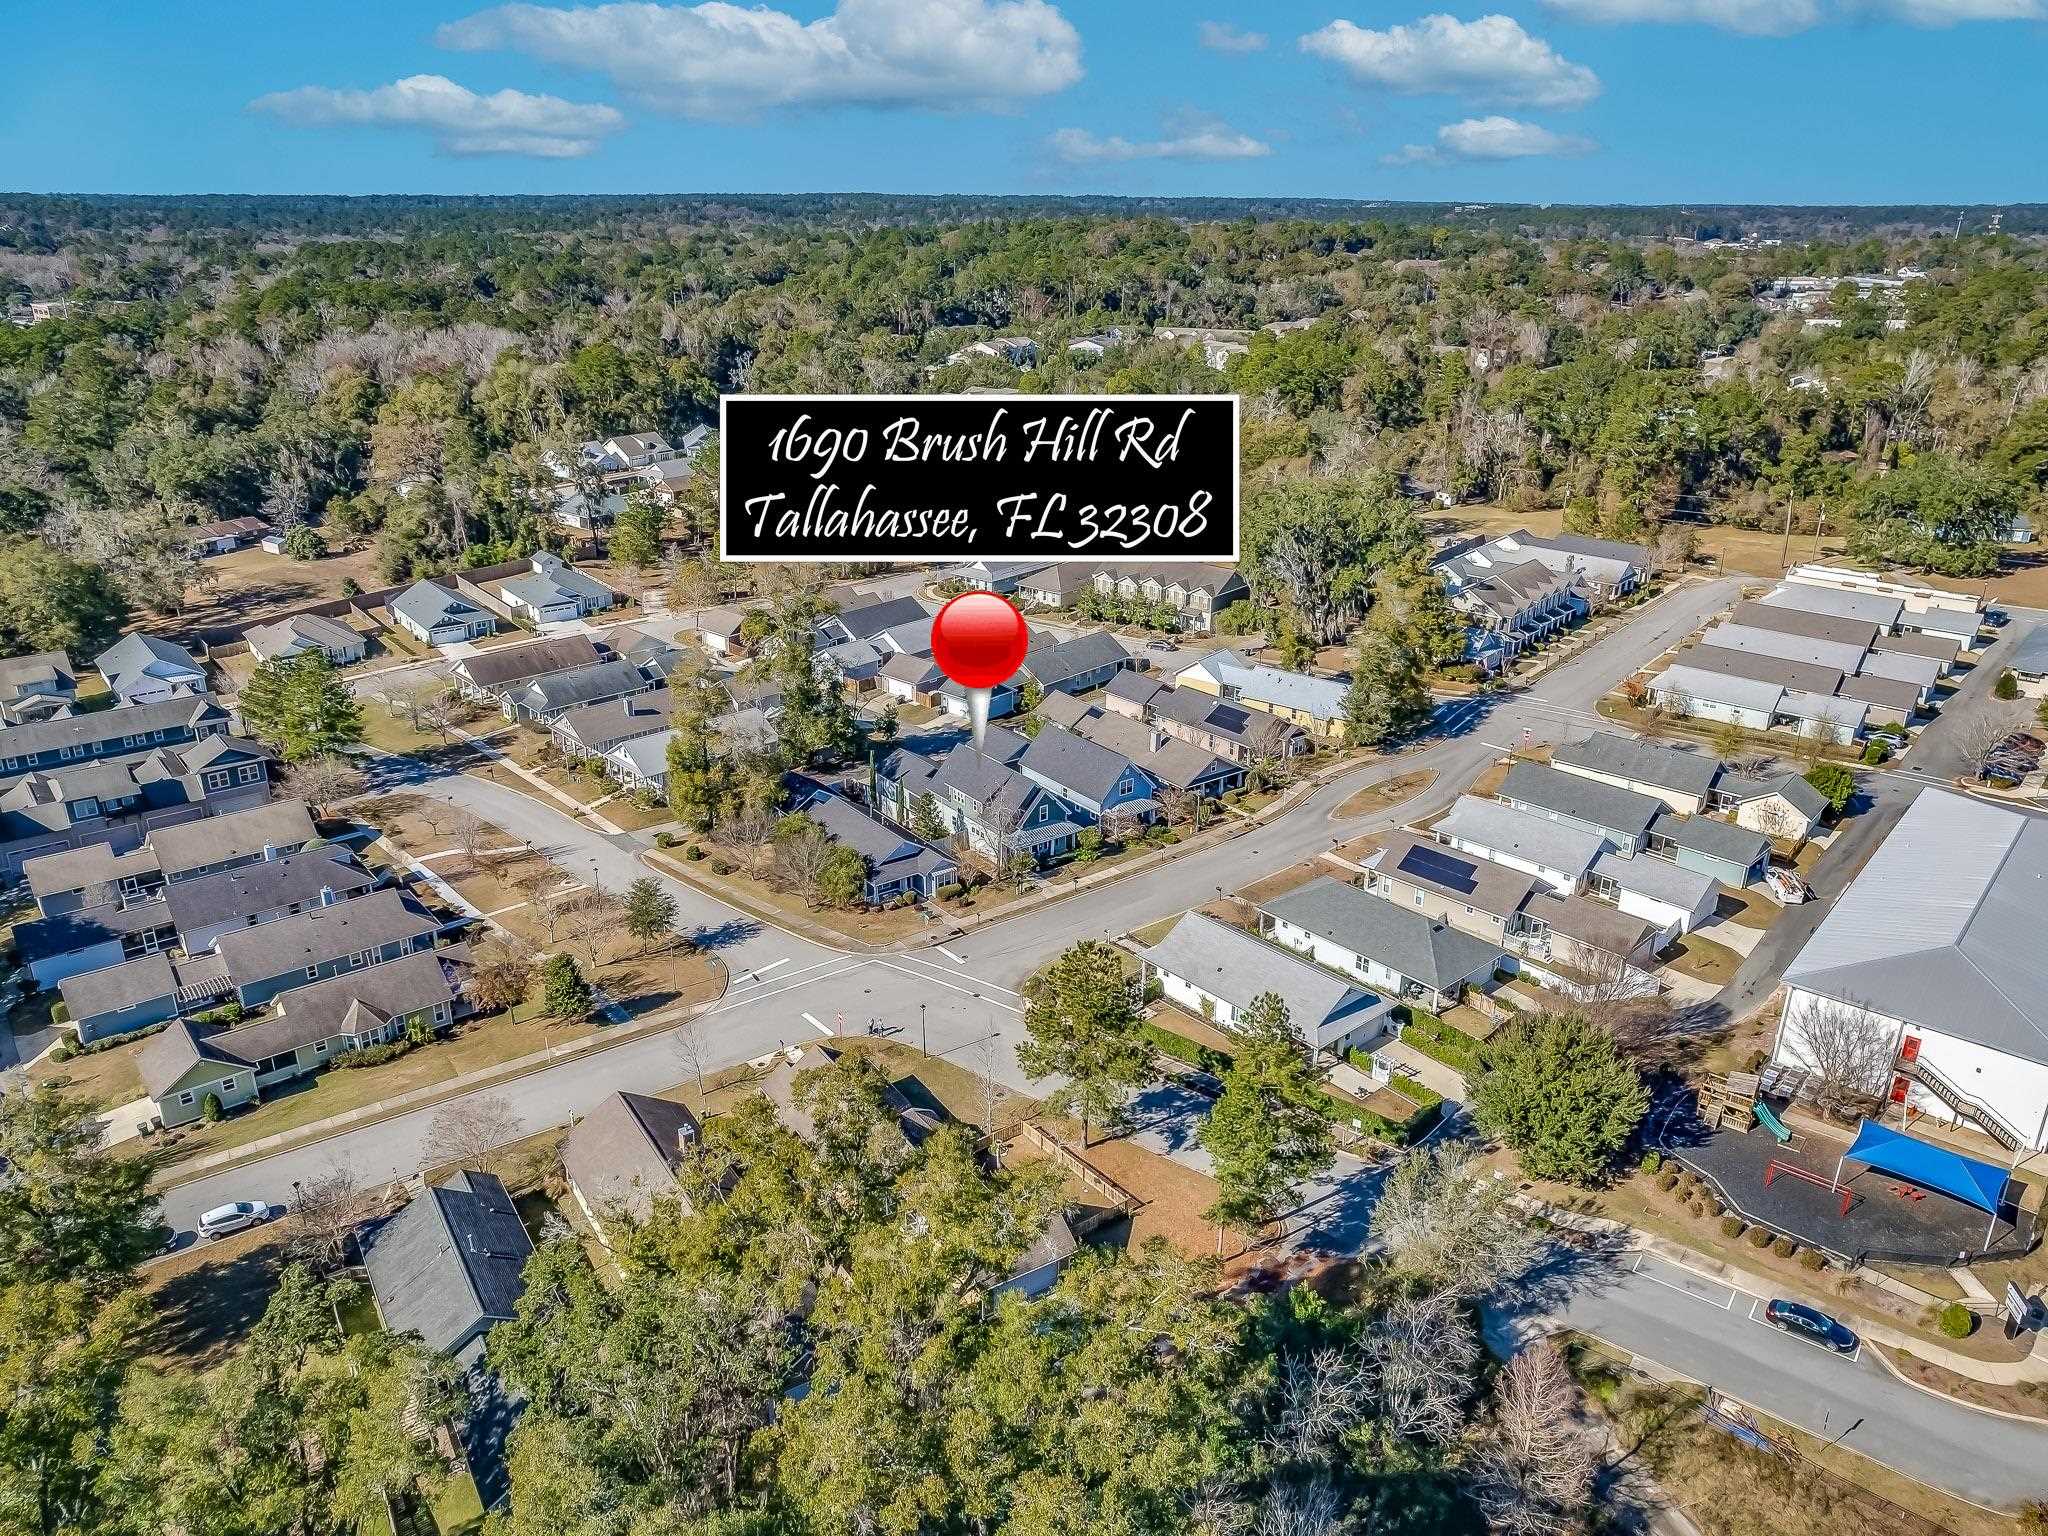 1690 Brush Hill Road,TALLAHASSEE,Florida 32308,3 Bedrooms Bedrooms,2 BathroomsBathrooms,Detached single family,1690 Brush Hill Road,367083